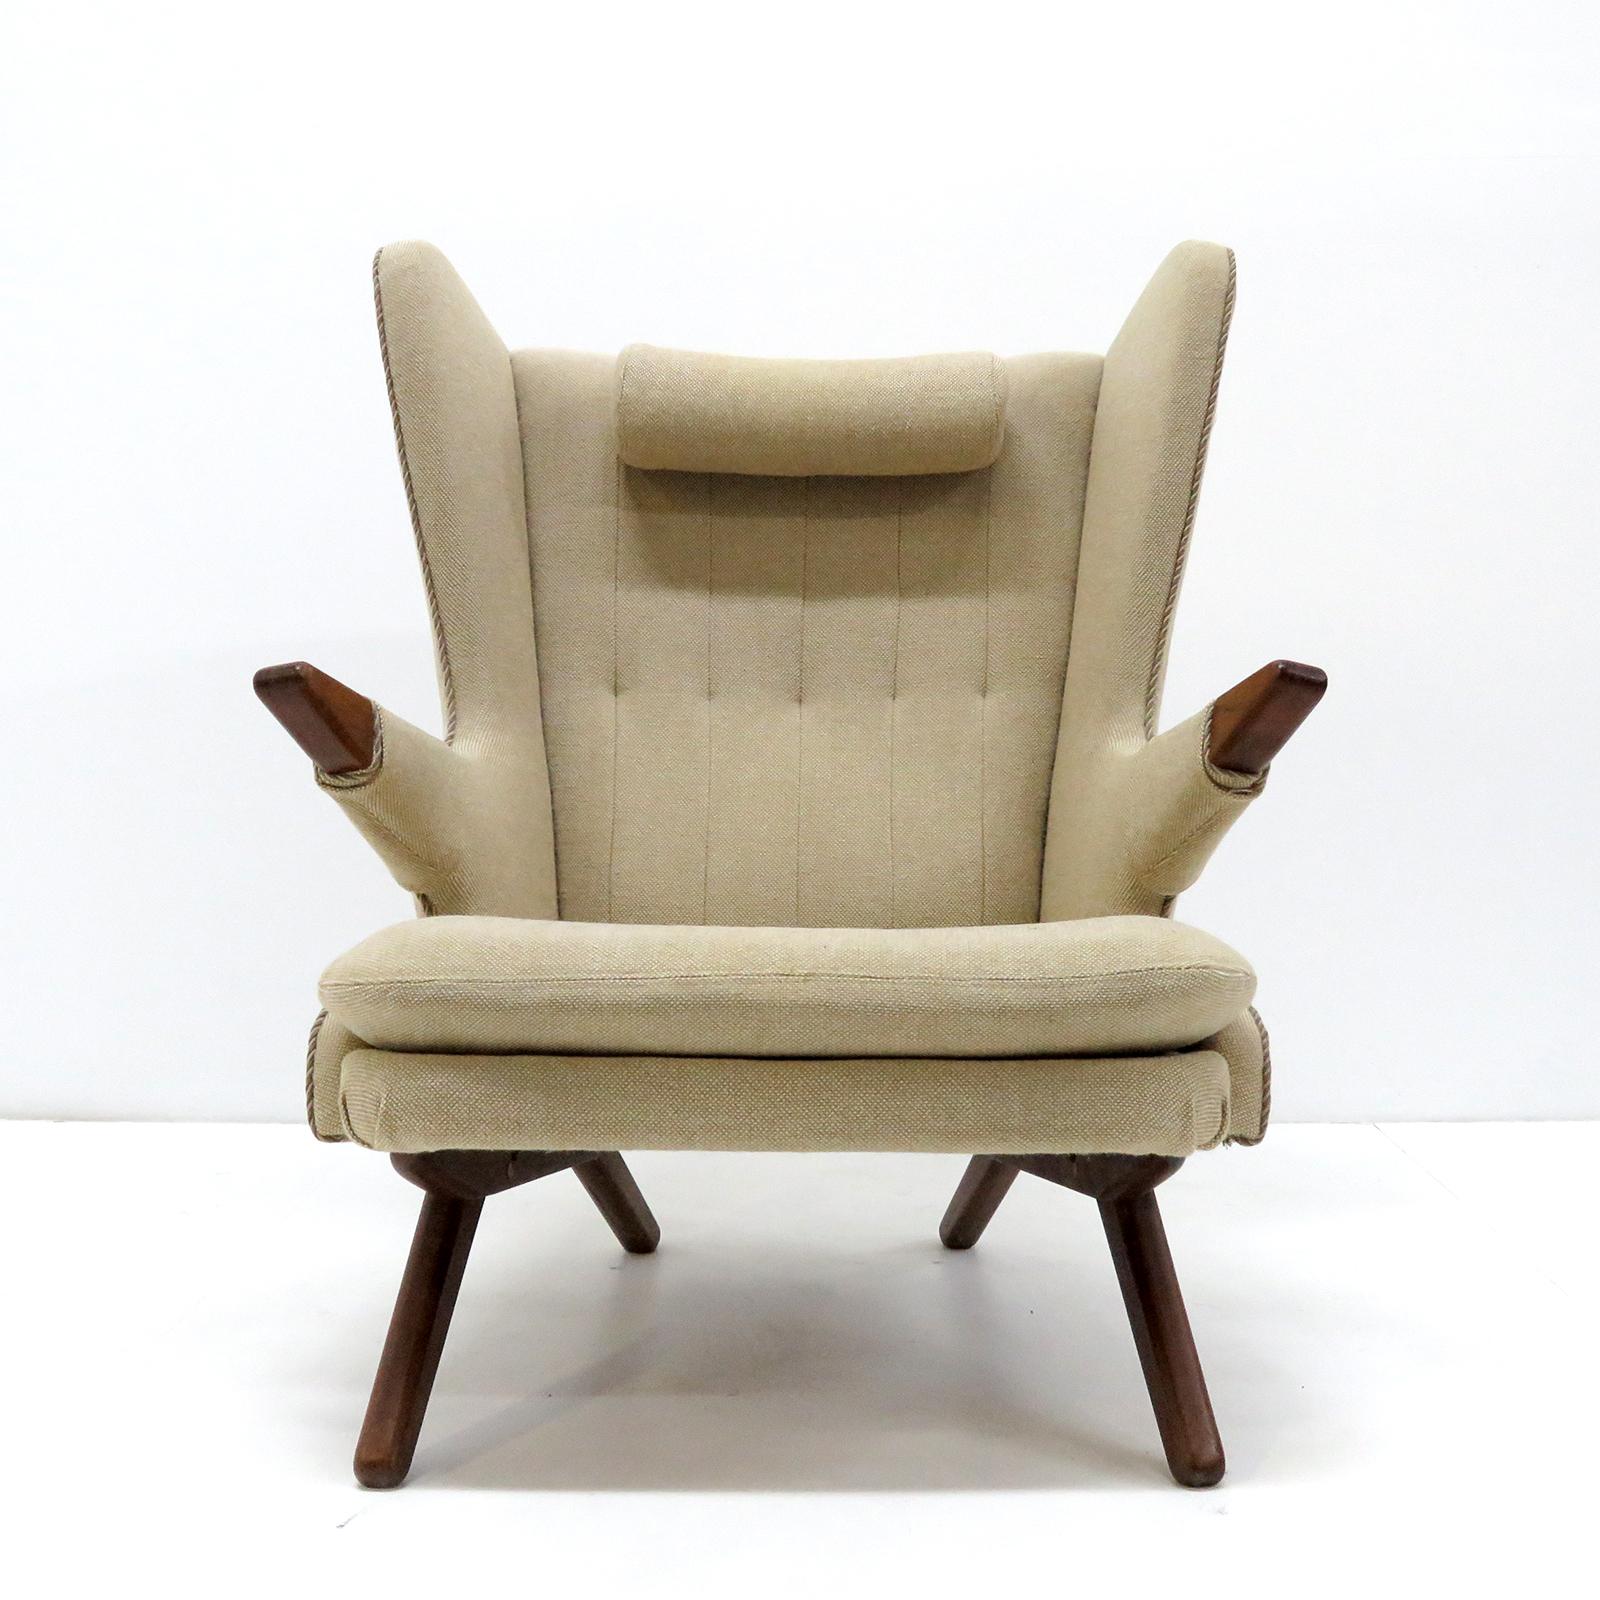 Rare high wing back lounge chair 'Model 91' by Svend Skipper for Skipper Møbelfabrik, 1950, upholstered in linen with a solid teak base and organic teak hand rests, removable arm covers and counterweight headrest. Striking silhouette with wonderful